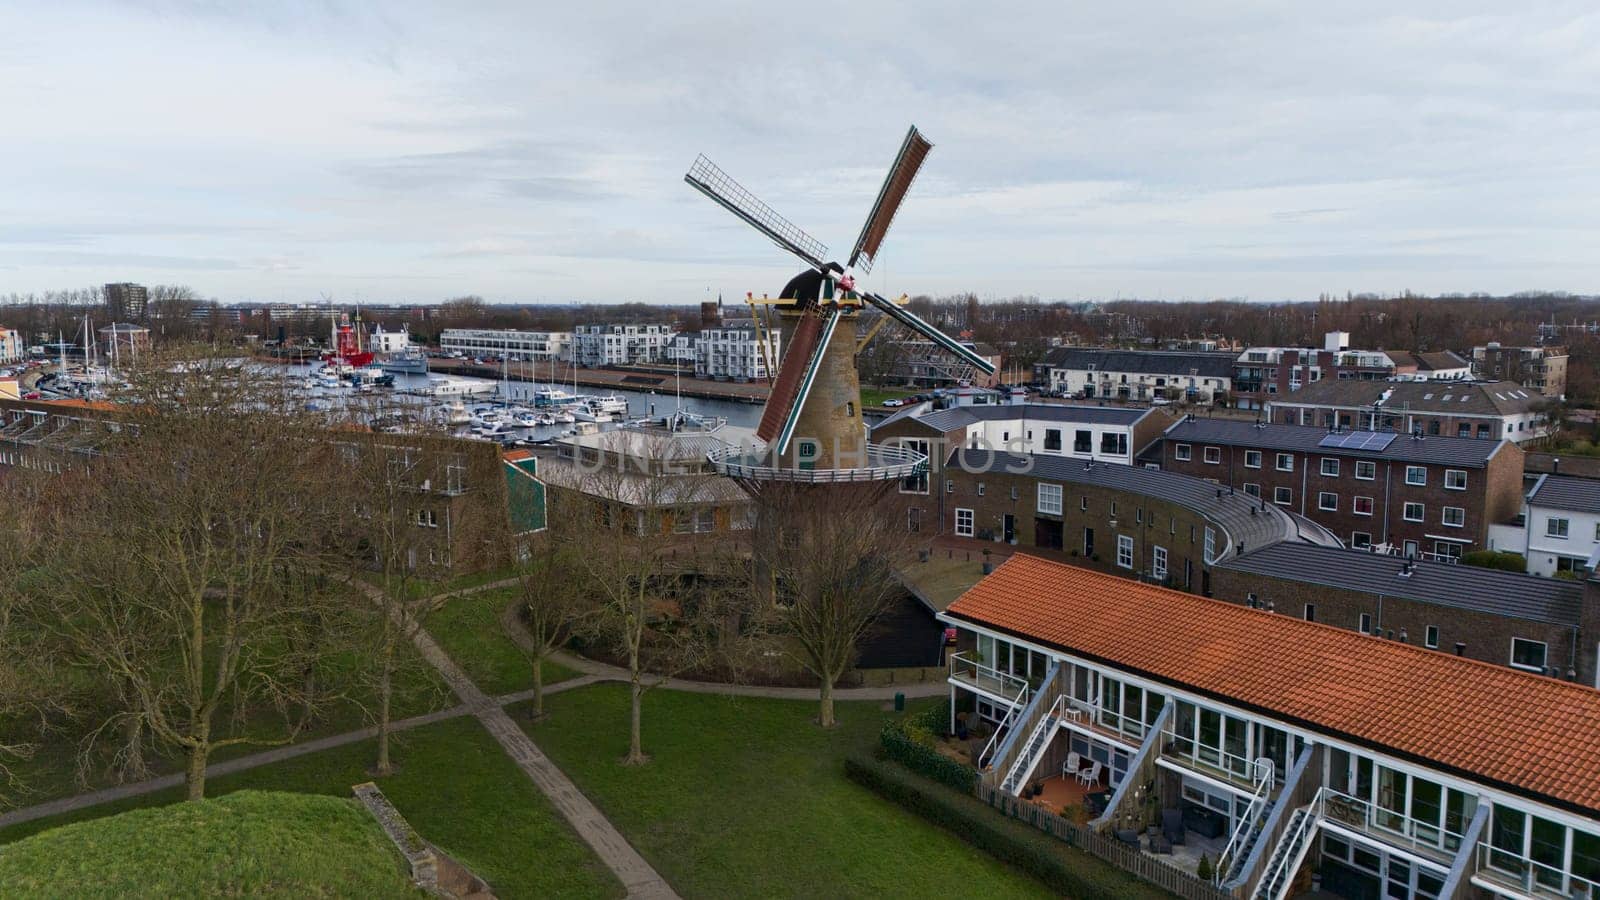 drone aerial photo of windmill de goede hoop in holland village Hellevoetsluis with a part of the harbor in the background